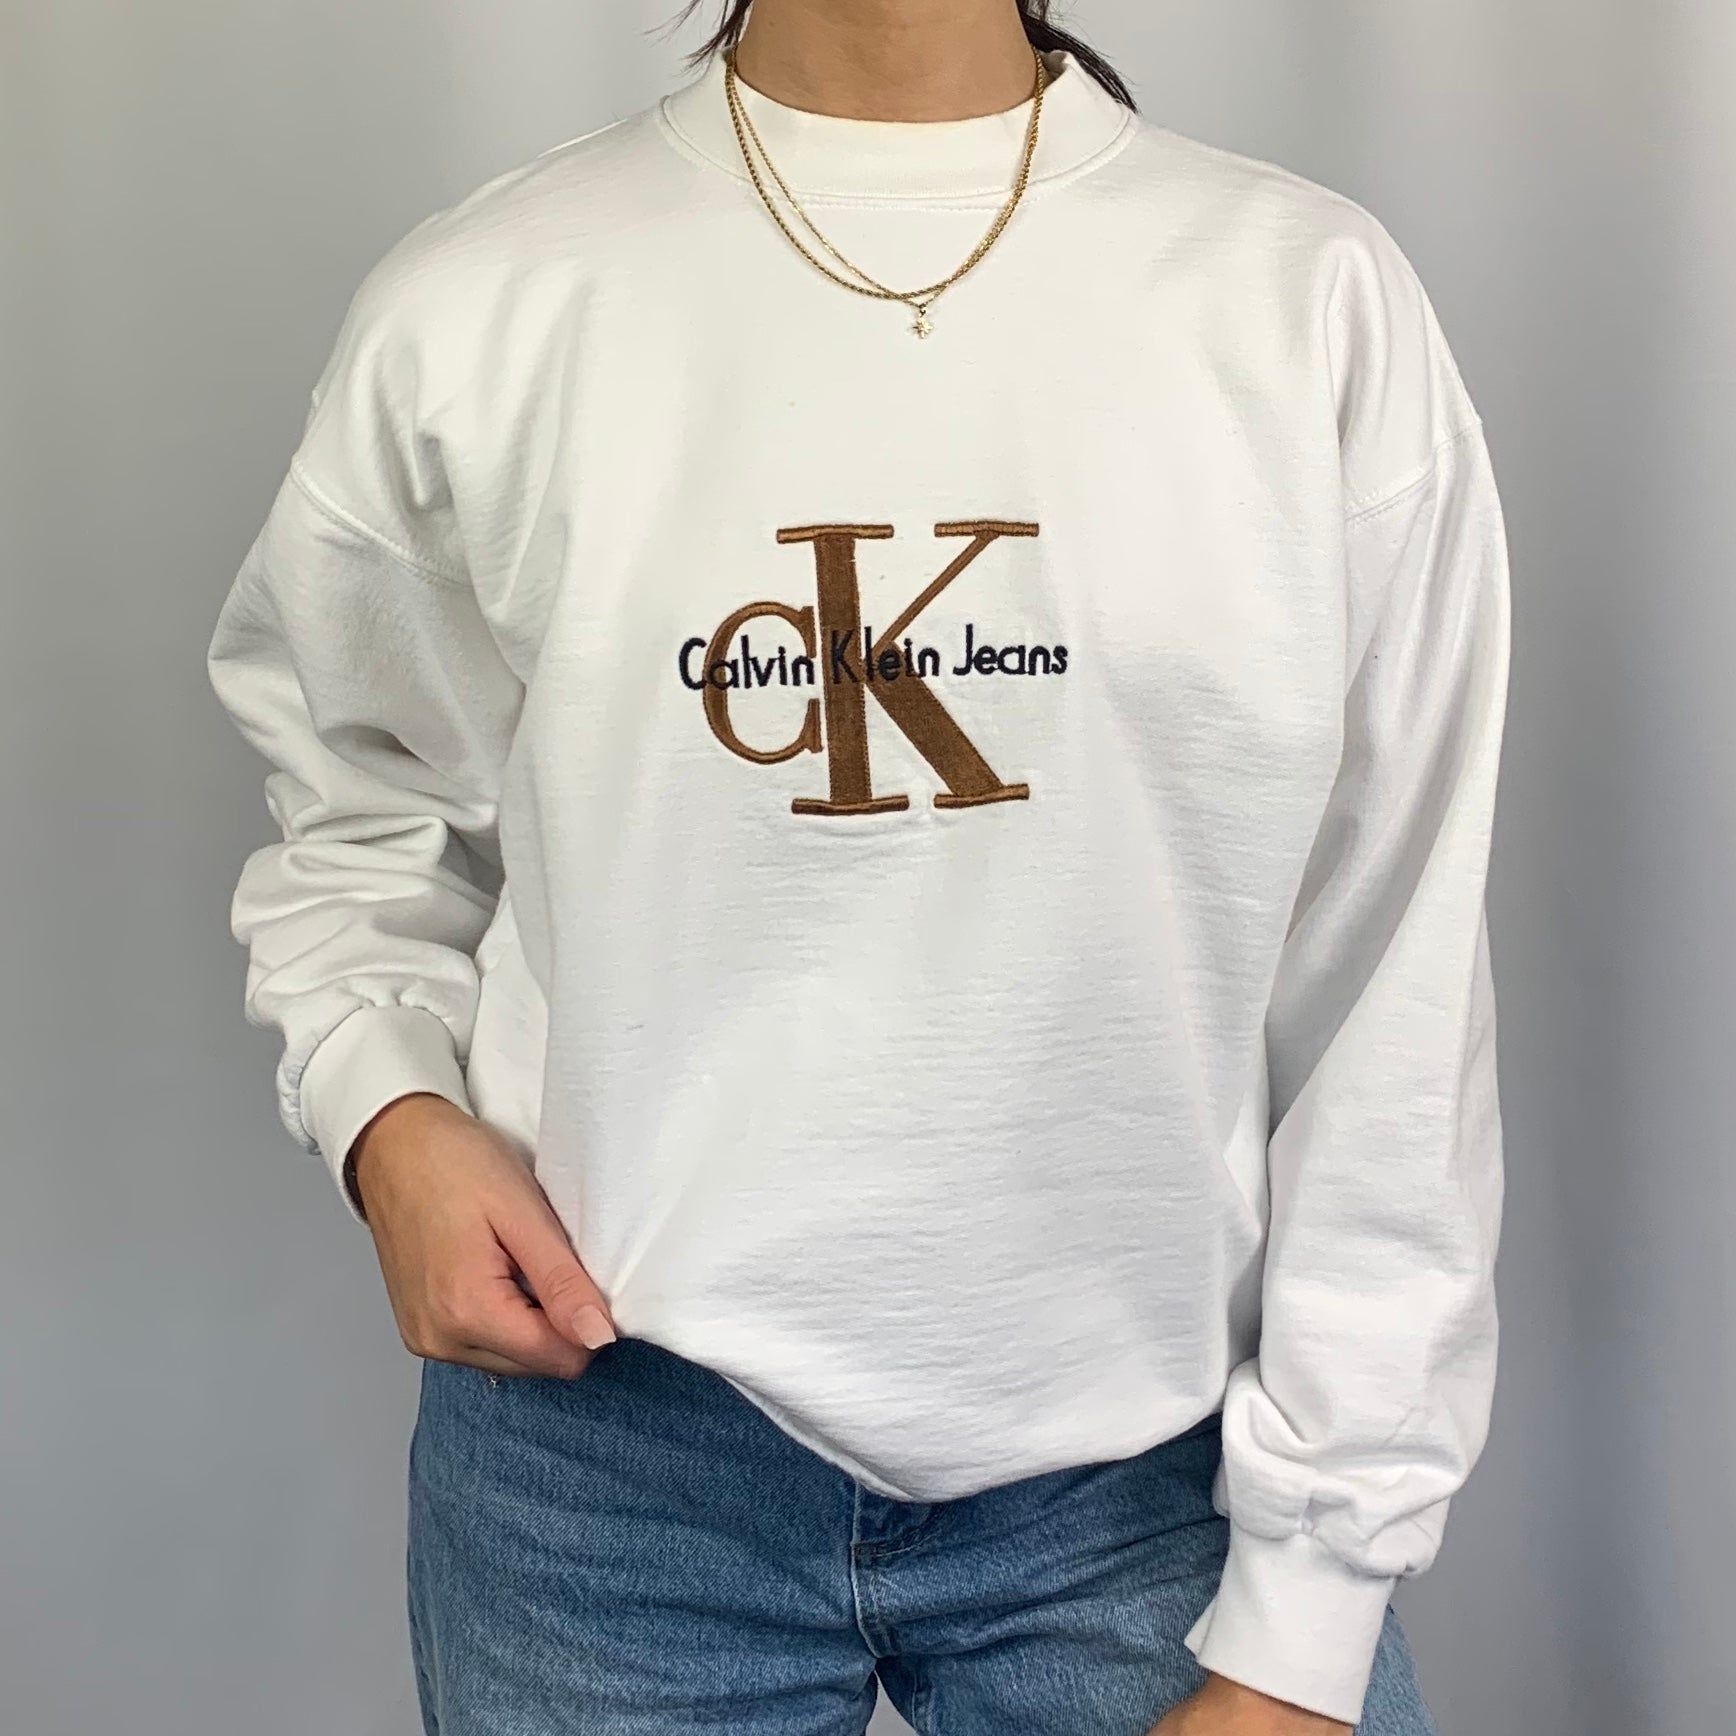 VINTAGE CALVIN KLEIN SPELLOUT SWEATSHIRT WITH EMBROIDERED SPELLOUT & LOGO - Women's Large/Men's Small